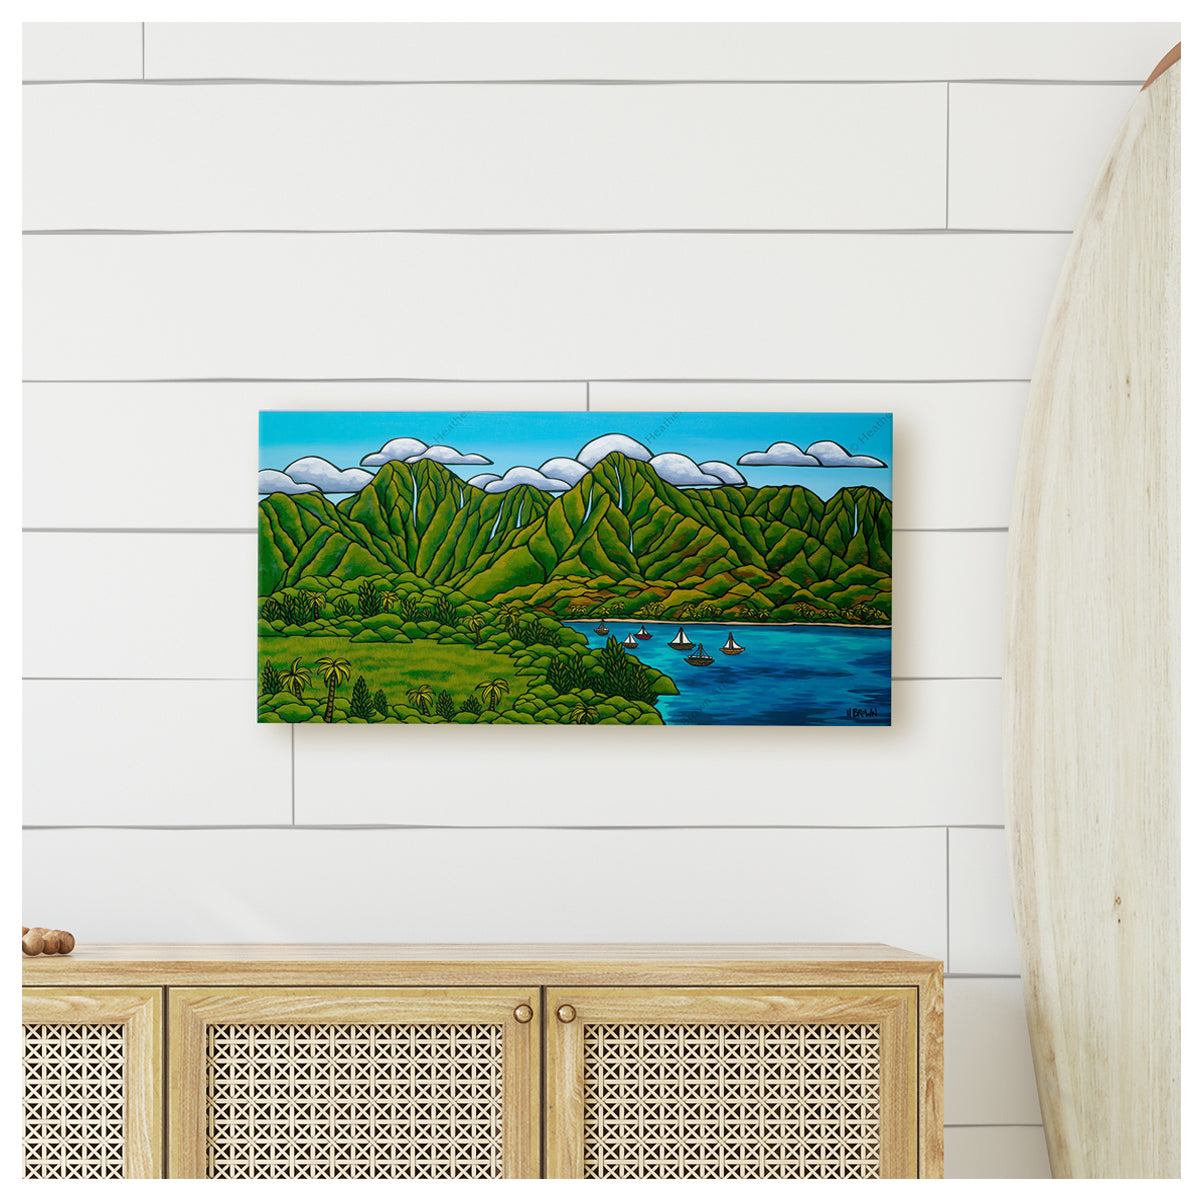 Sailboats at Hanalei by Heather Brown Canvas Giclée Wall Artwork